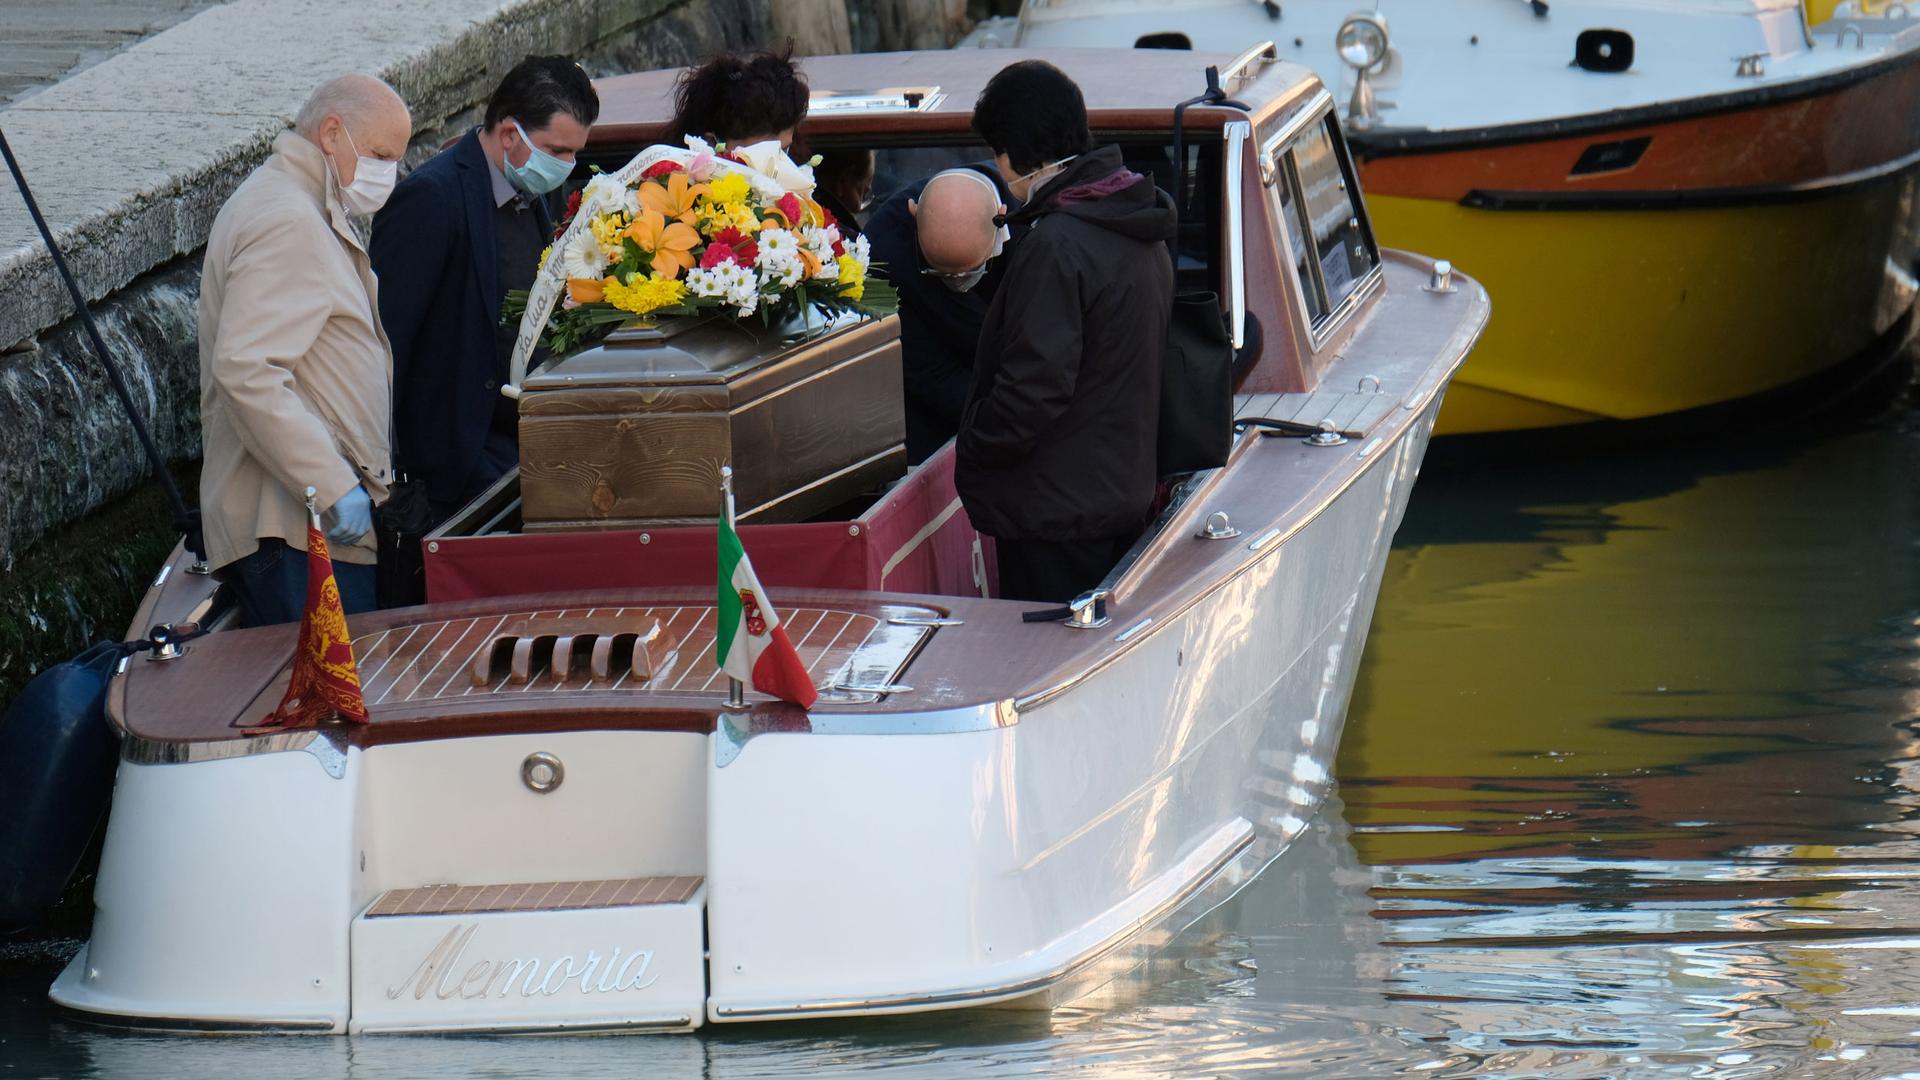 People gather around a coffin on a boat